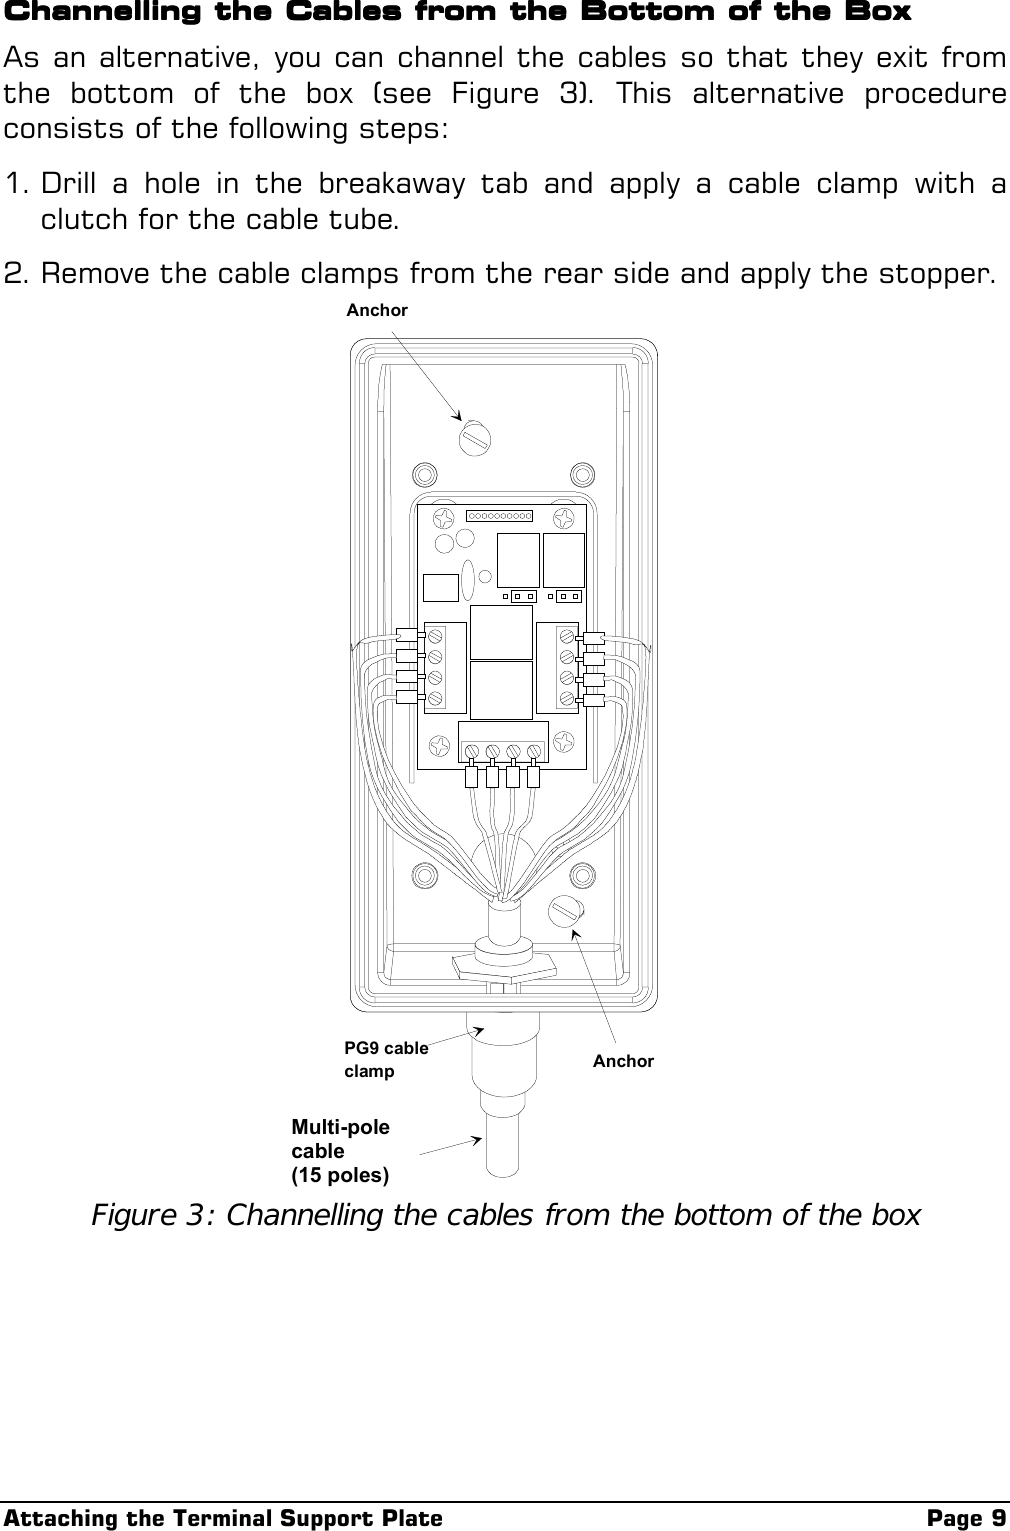 Attaching the Terminal Support Plate Page 9Channelling the Cables from the Bottom of the BoxChannelling the Cables from the Bottom of the BoxChannelling the Cables from the Bottom of the BoxChannelling the Cables from the Bottom of the BoxAs an alternative, you can channel the cables so that they exit fromthe bottom of the box (see Figure 3). This alternative procedureconsists of the following steps:1. Drill a hole in the breakaway tab and apply a cable clamp with aclutch for the cable tube.2. Remove the cable clamps from the rear side and apply the stopper.AnchorAnchorPG9 cableclampMulti-polecable(15 poles)Figure 3: Channelling the cables from the bottom of the box